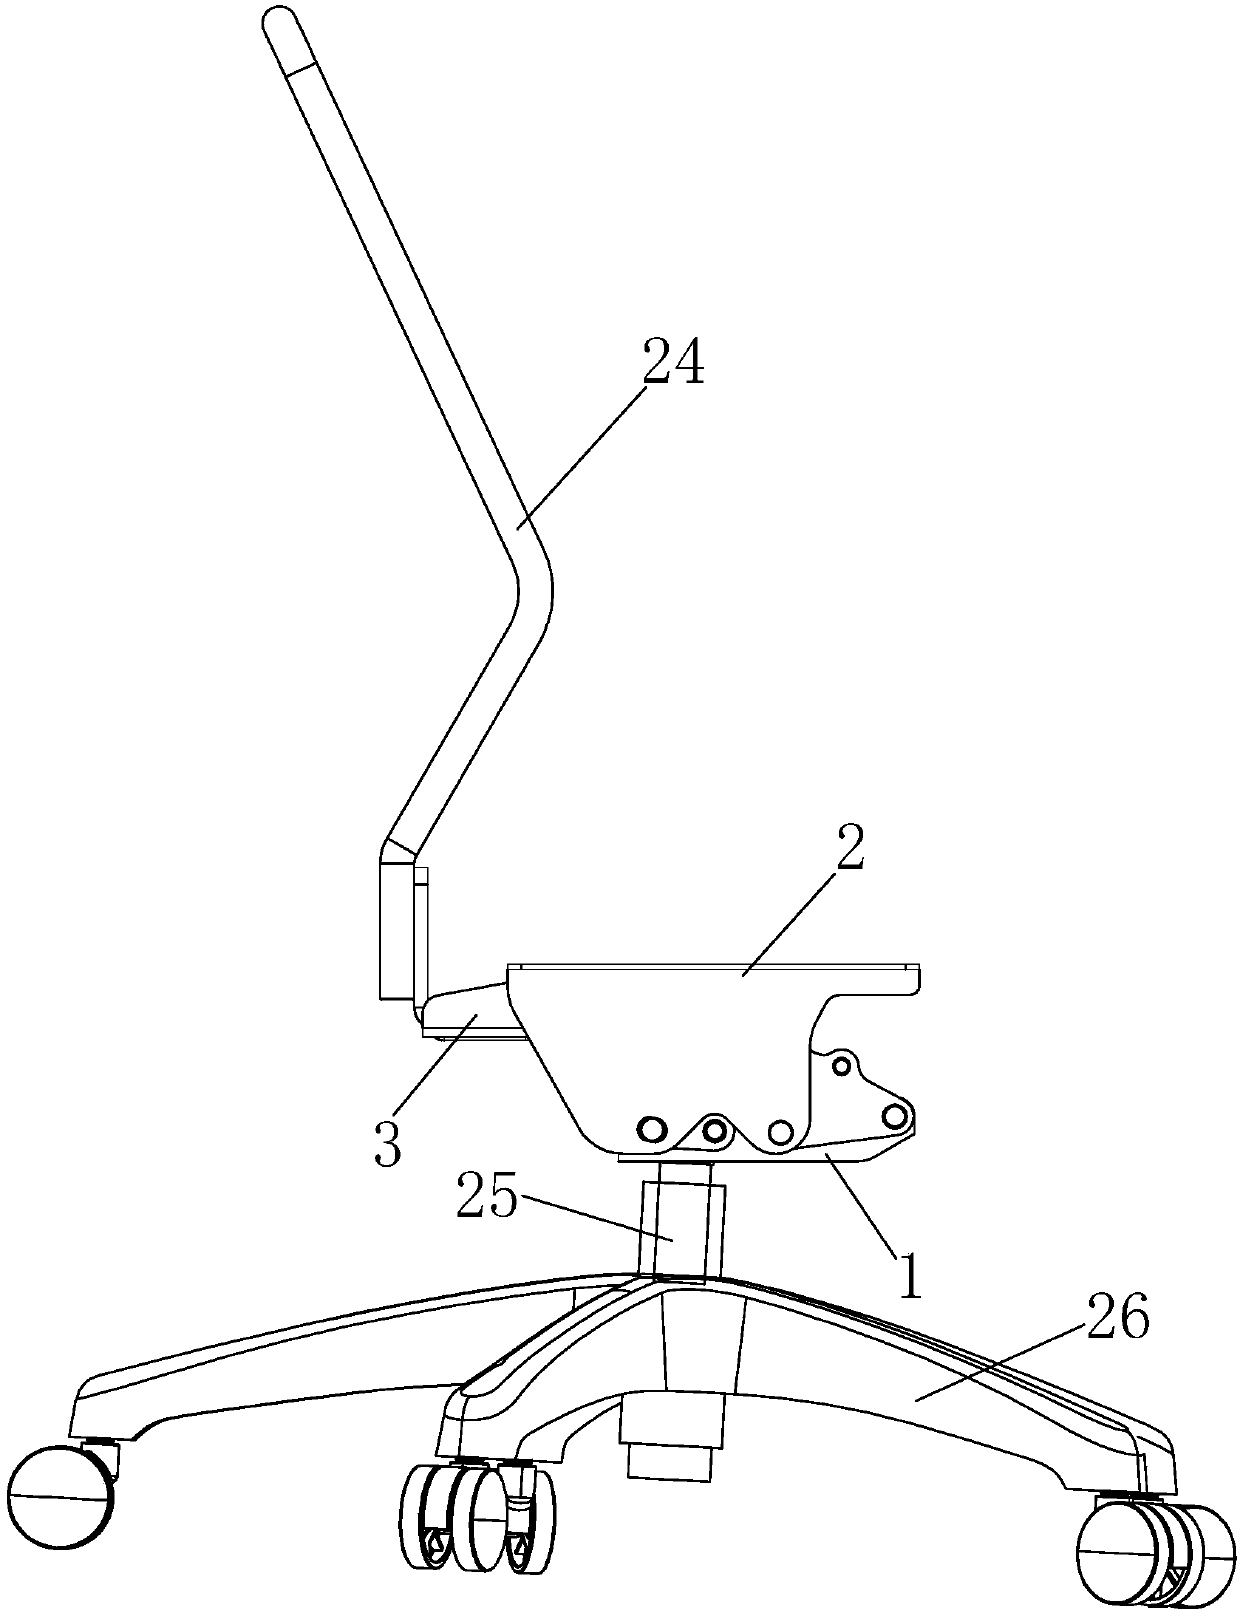 Synchronous back and seat linkage device used for chair and chair